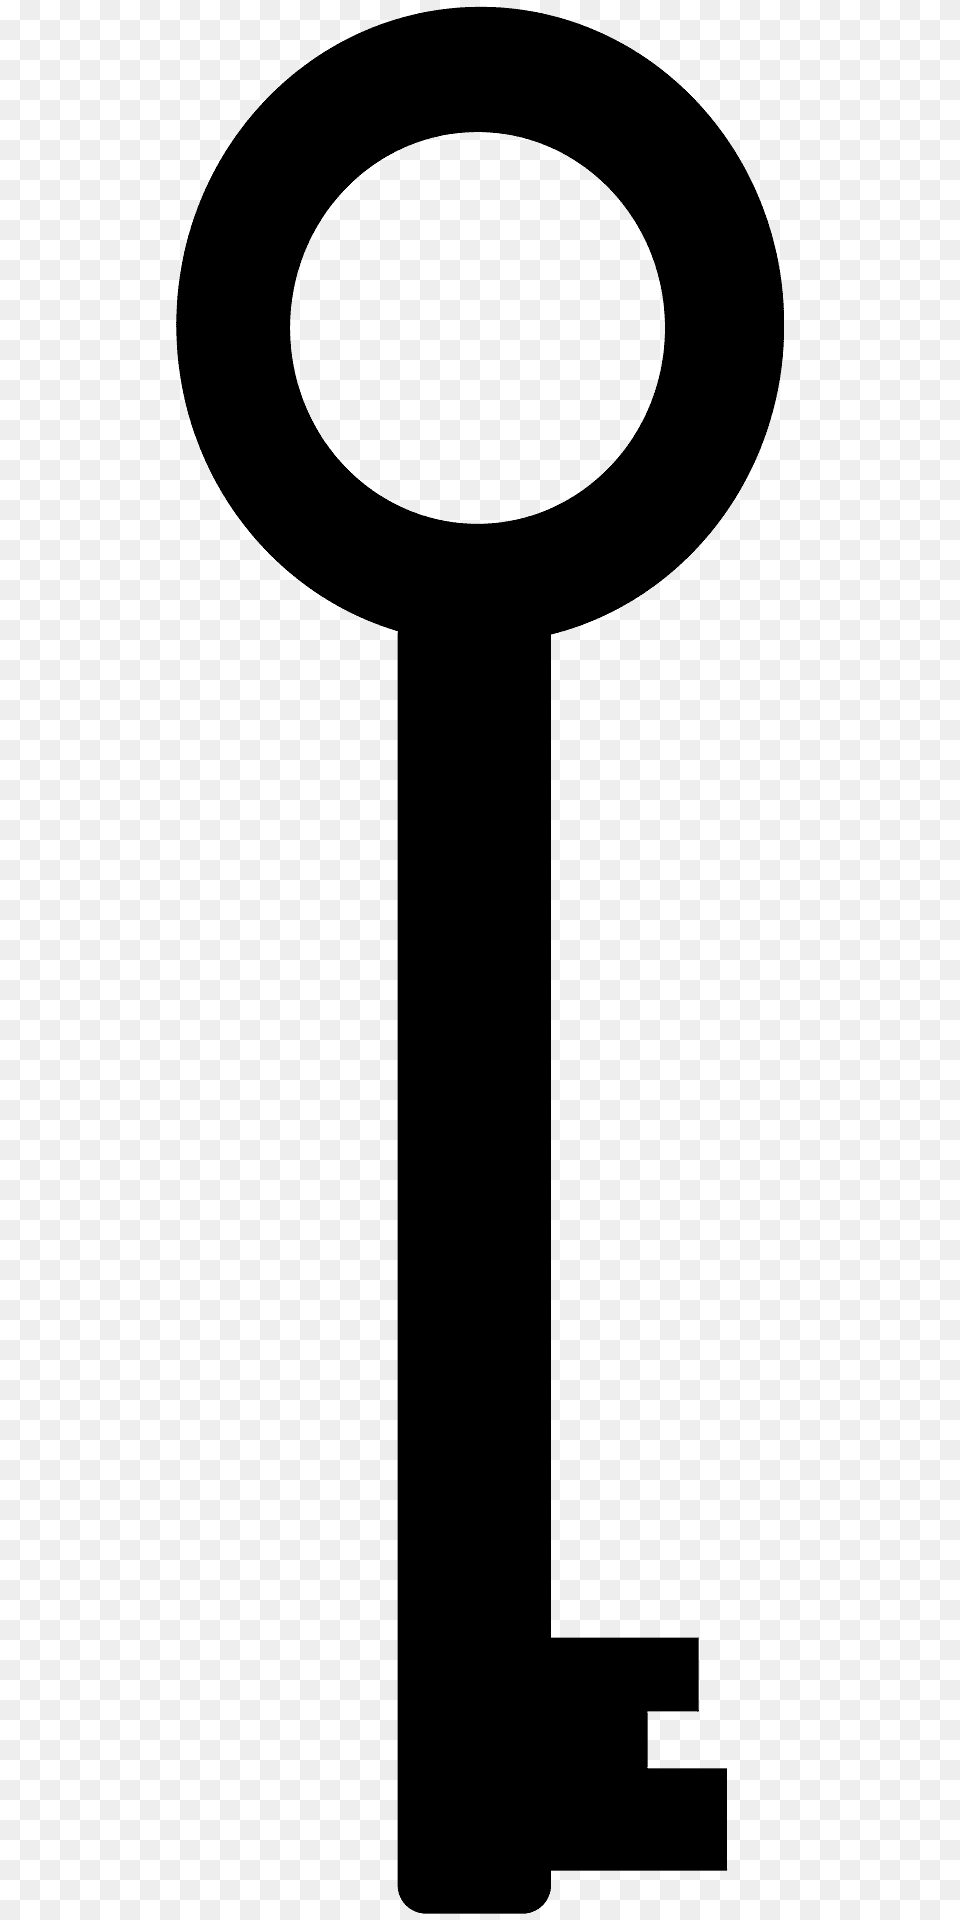 Simple Key Silhouette Png Image